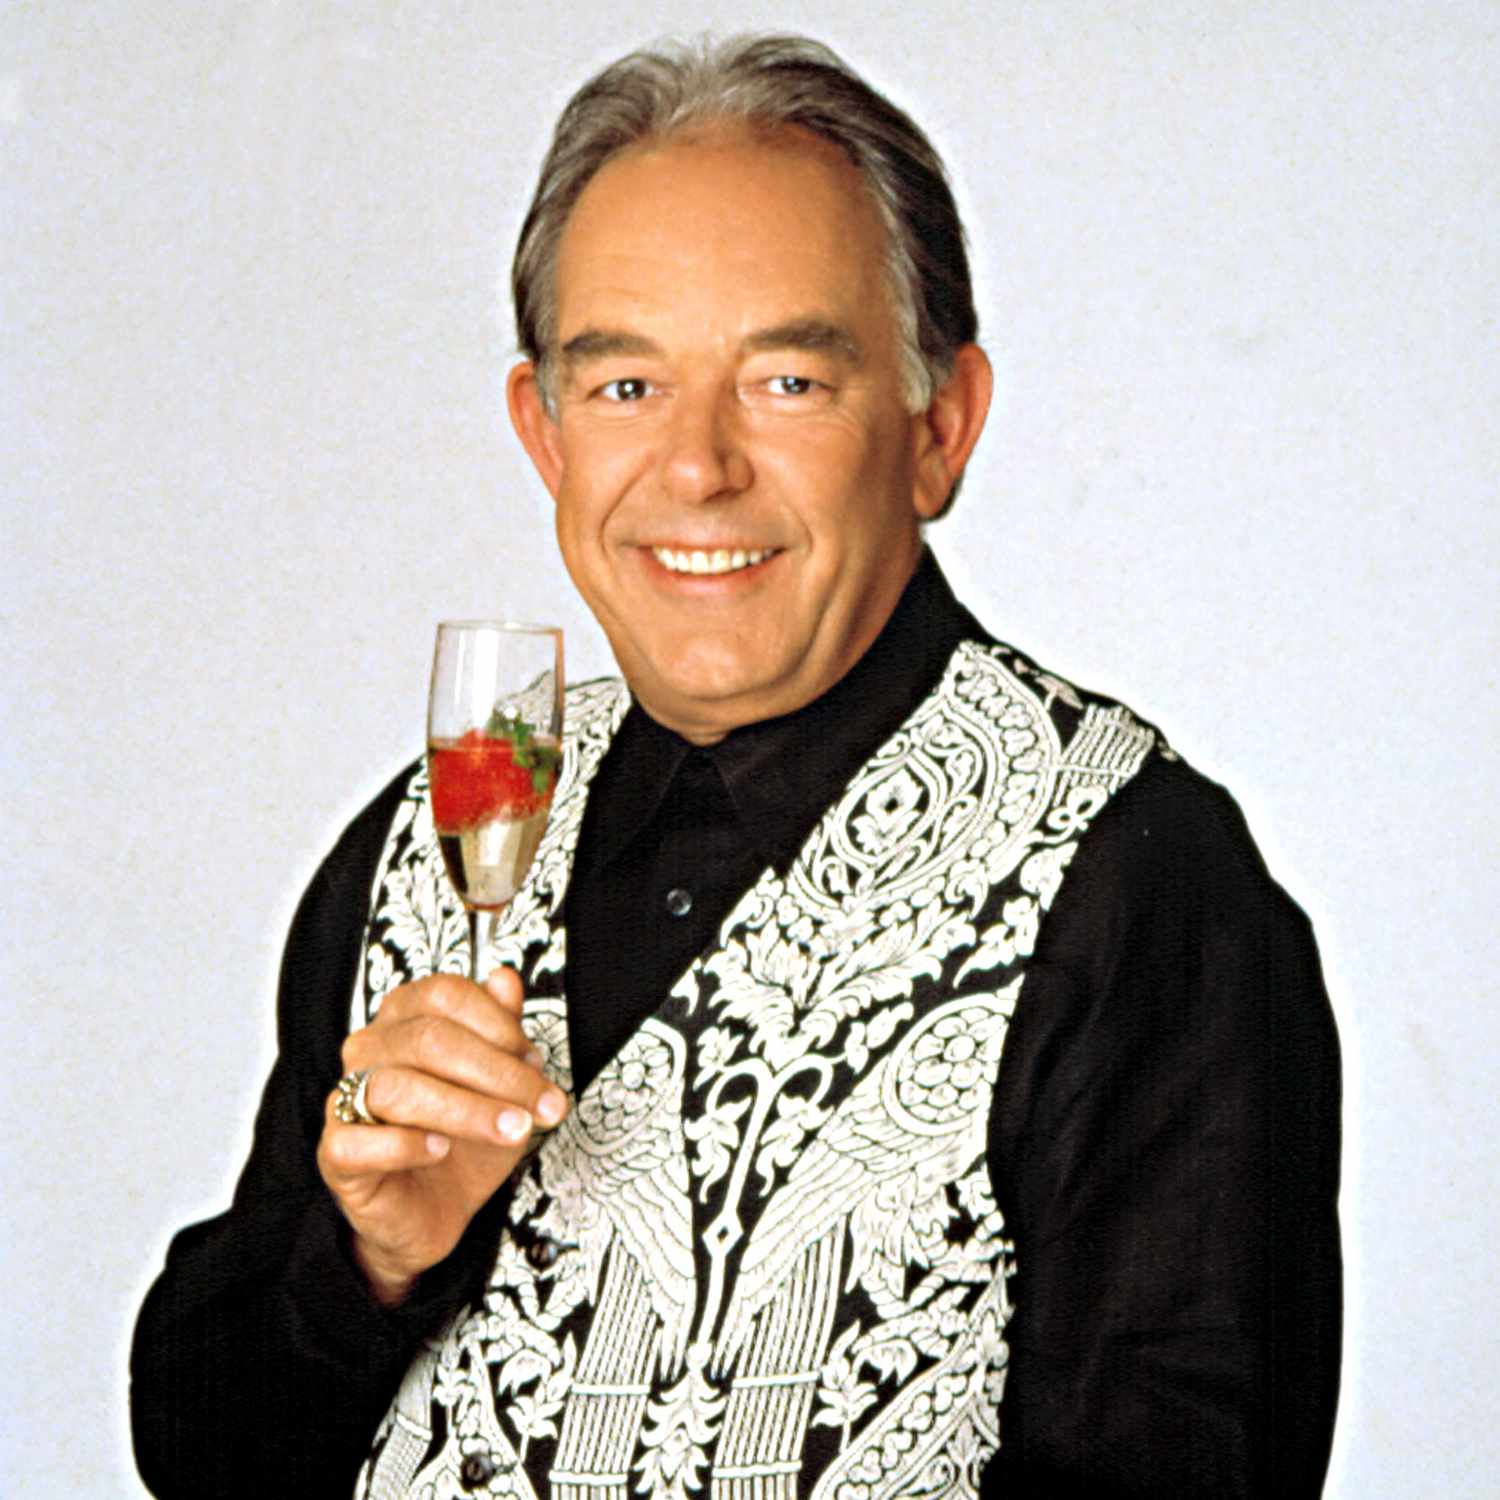 LIFESTYLES OF THE RICH AND FAMOUS, host, Robin Leach, 1984-1994.